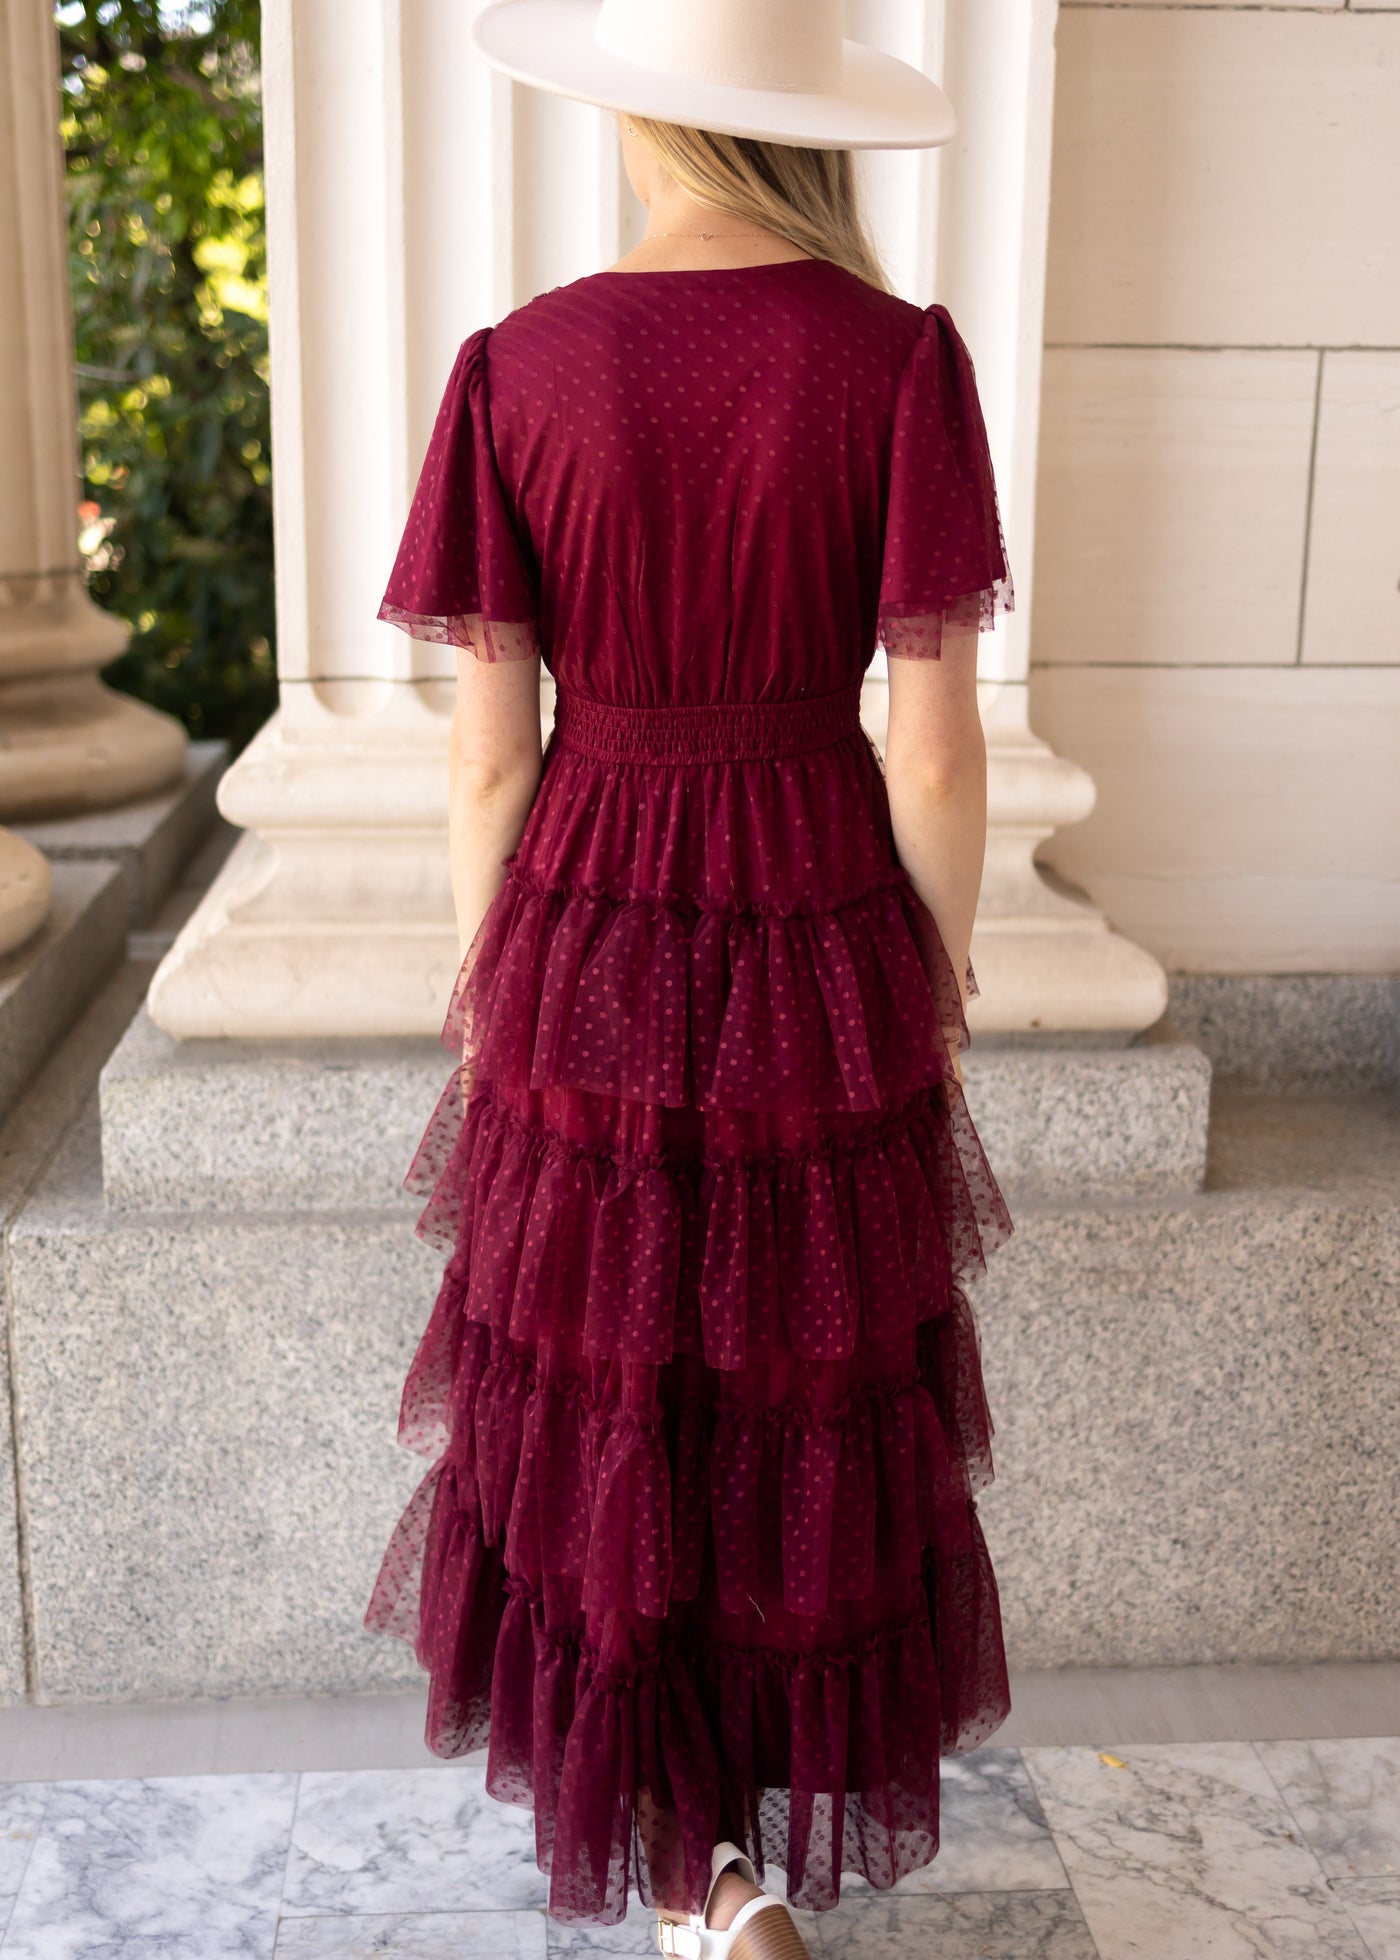 Back view of a burgundy dress with a ruffle skirt